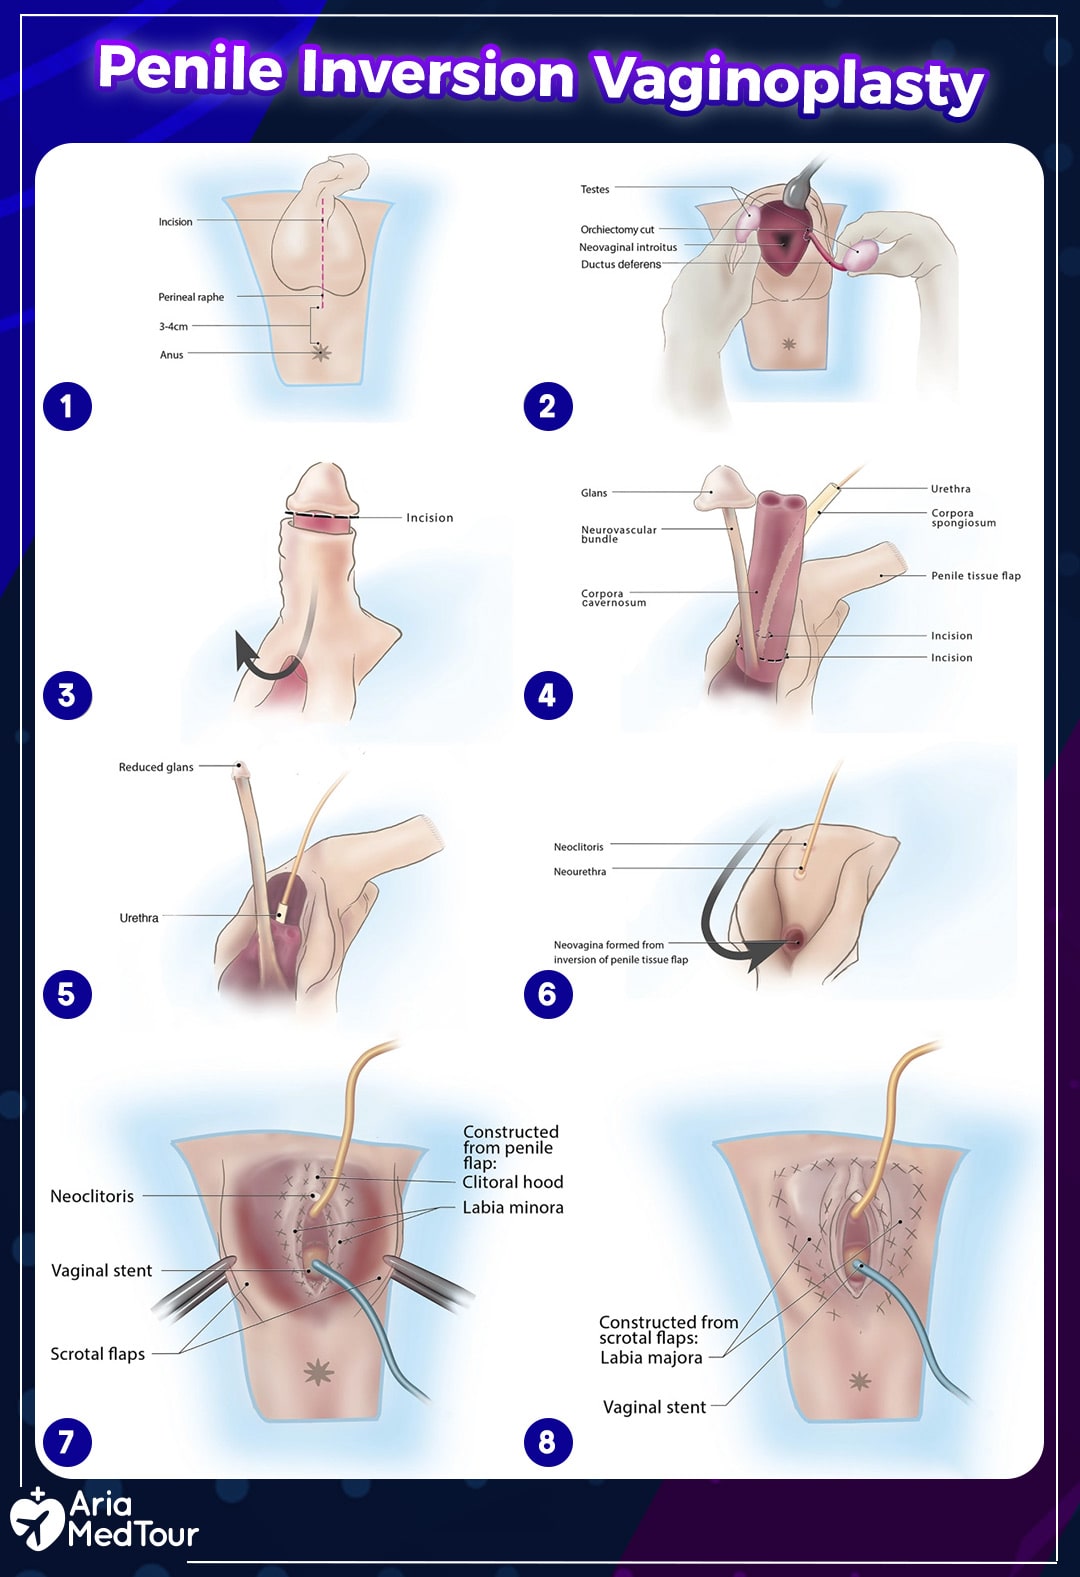 An unrealistic image of the procedure of Penile Inversion Vaginoplasty